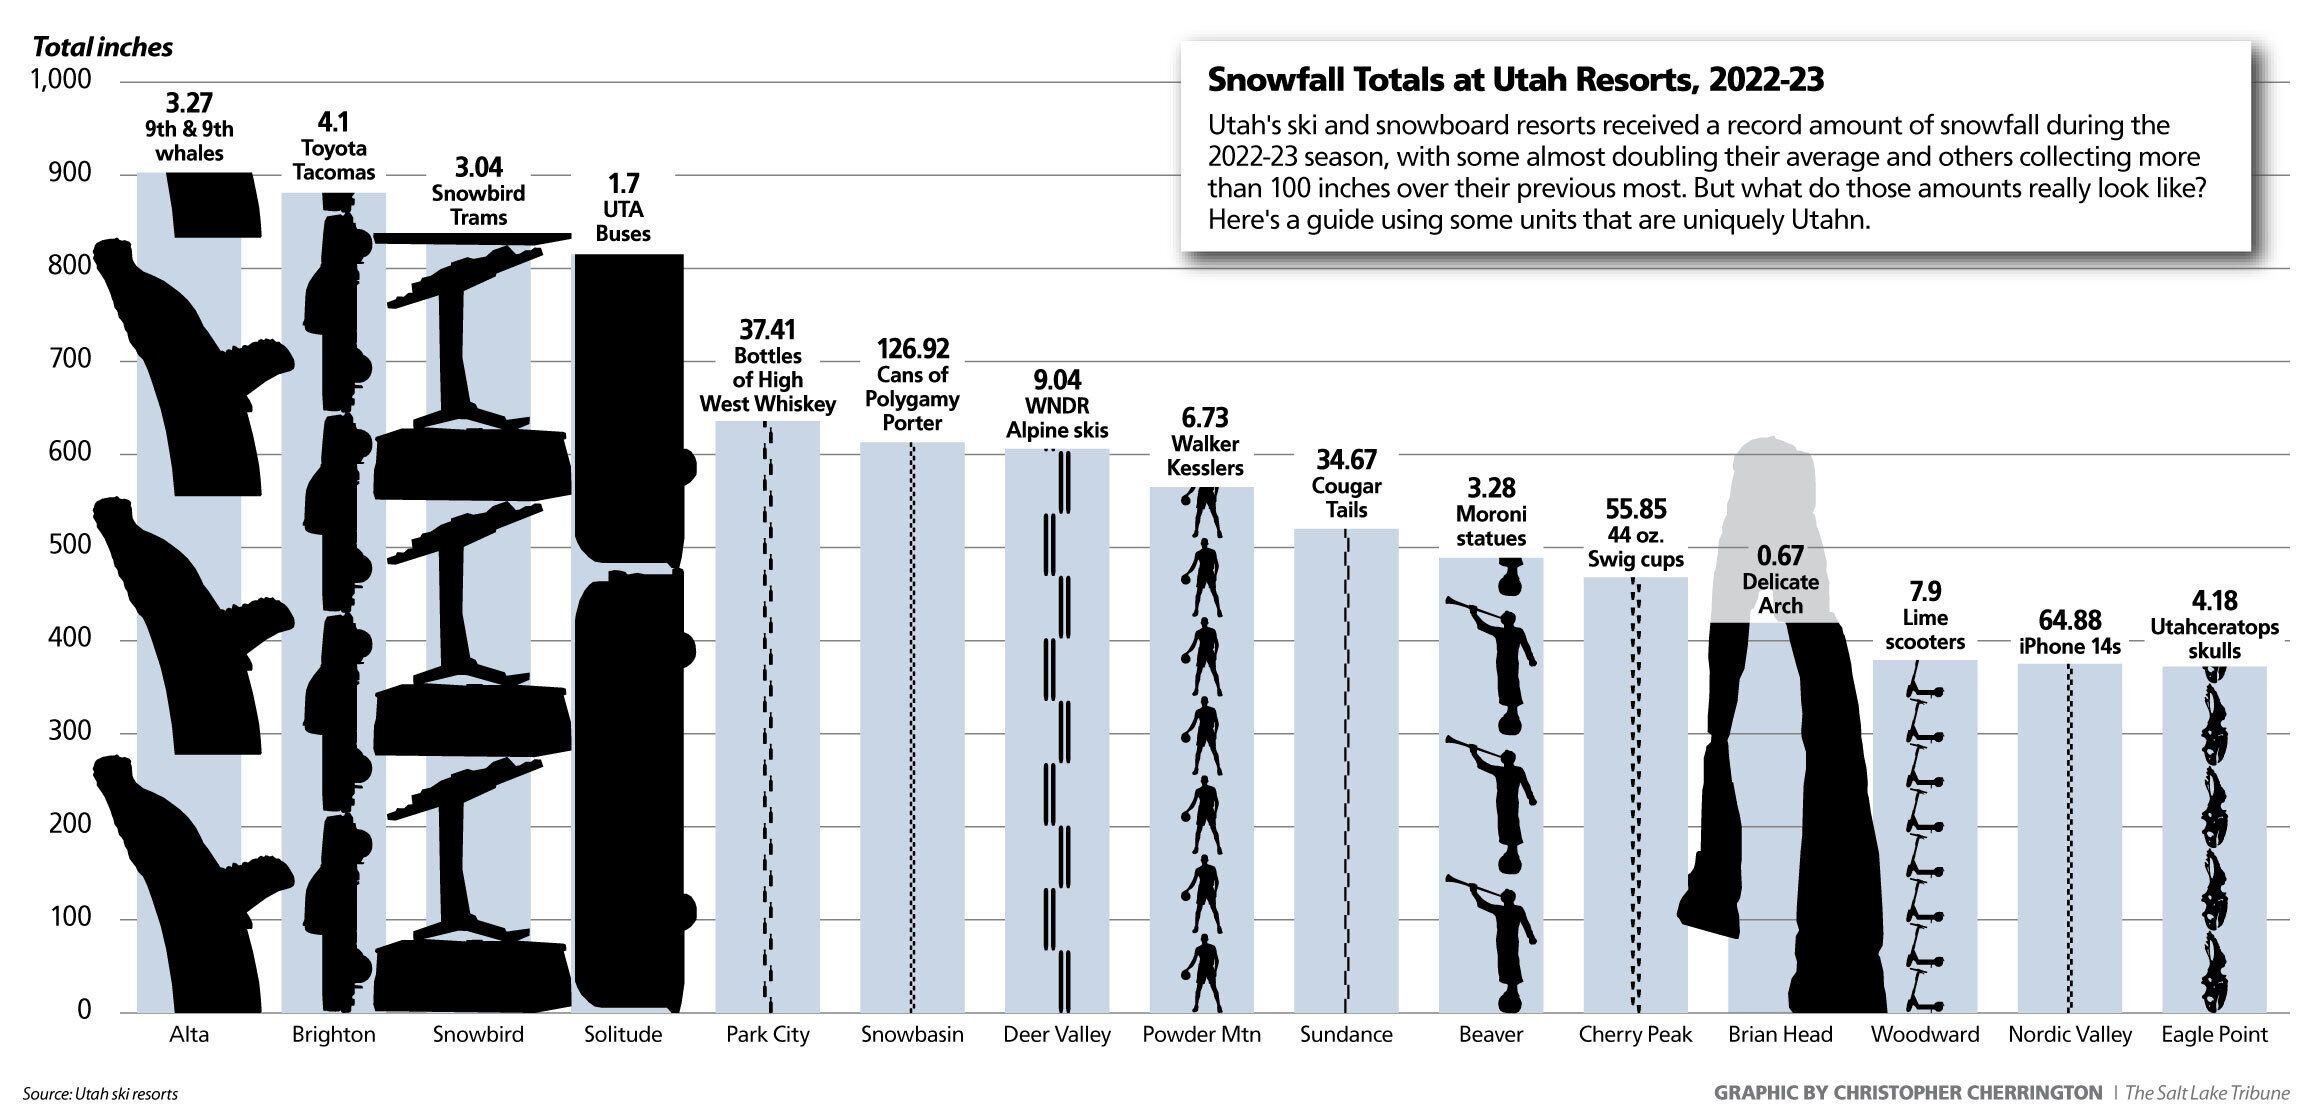 (Christopher Cherrington | The Salt Lake Tribune) Utah's 2022-23 ski season will continue through June thanks to record snowfall totals. Here's a uniquely Utah look at how much snow the state's resorts totaled.